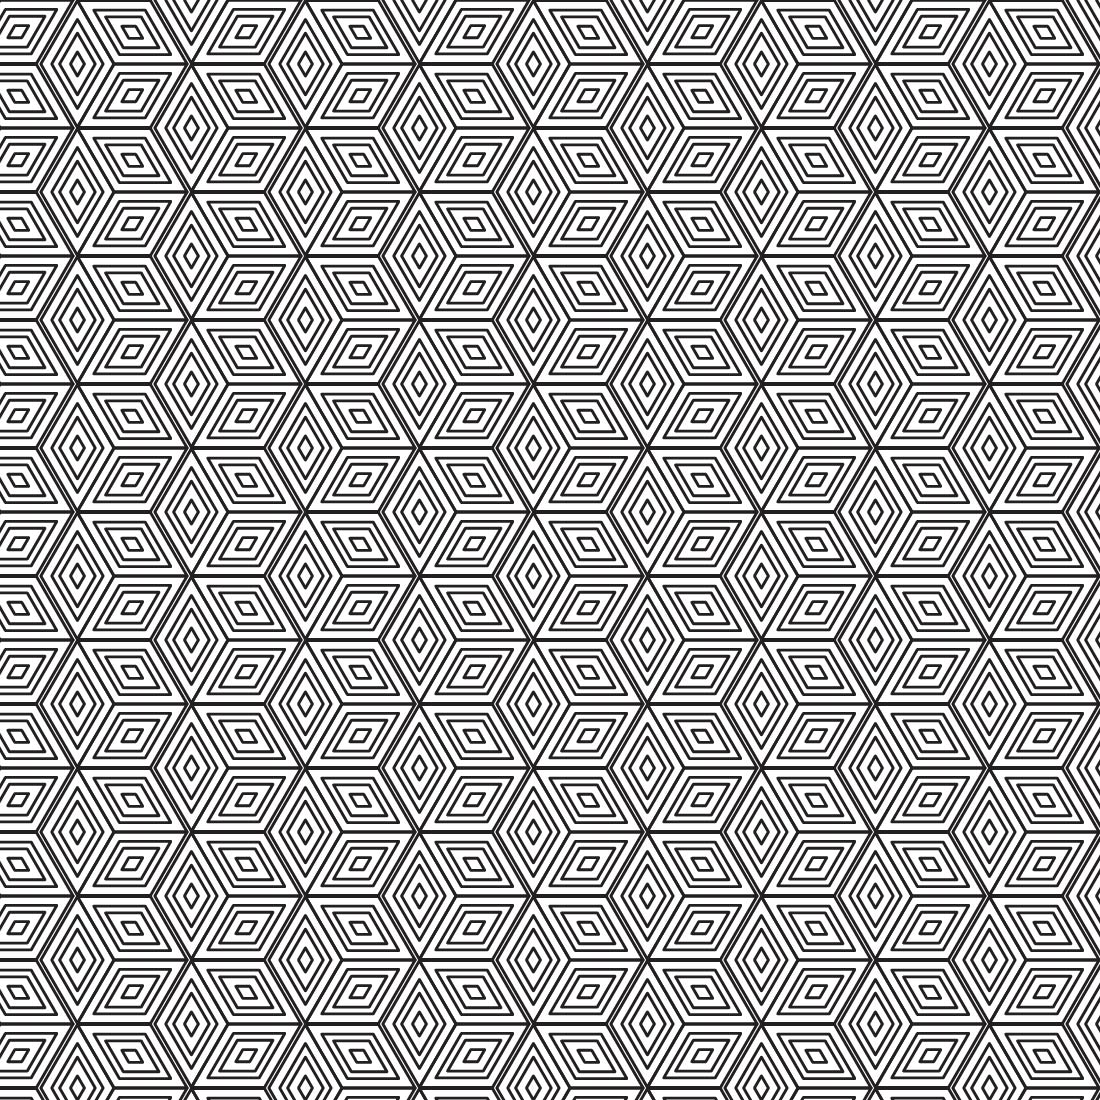 This is a circle grey gradient vector patterns.